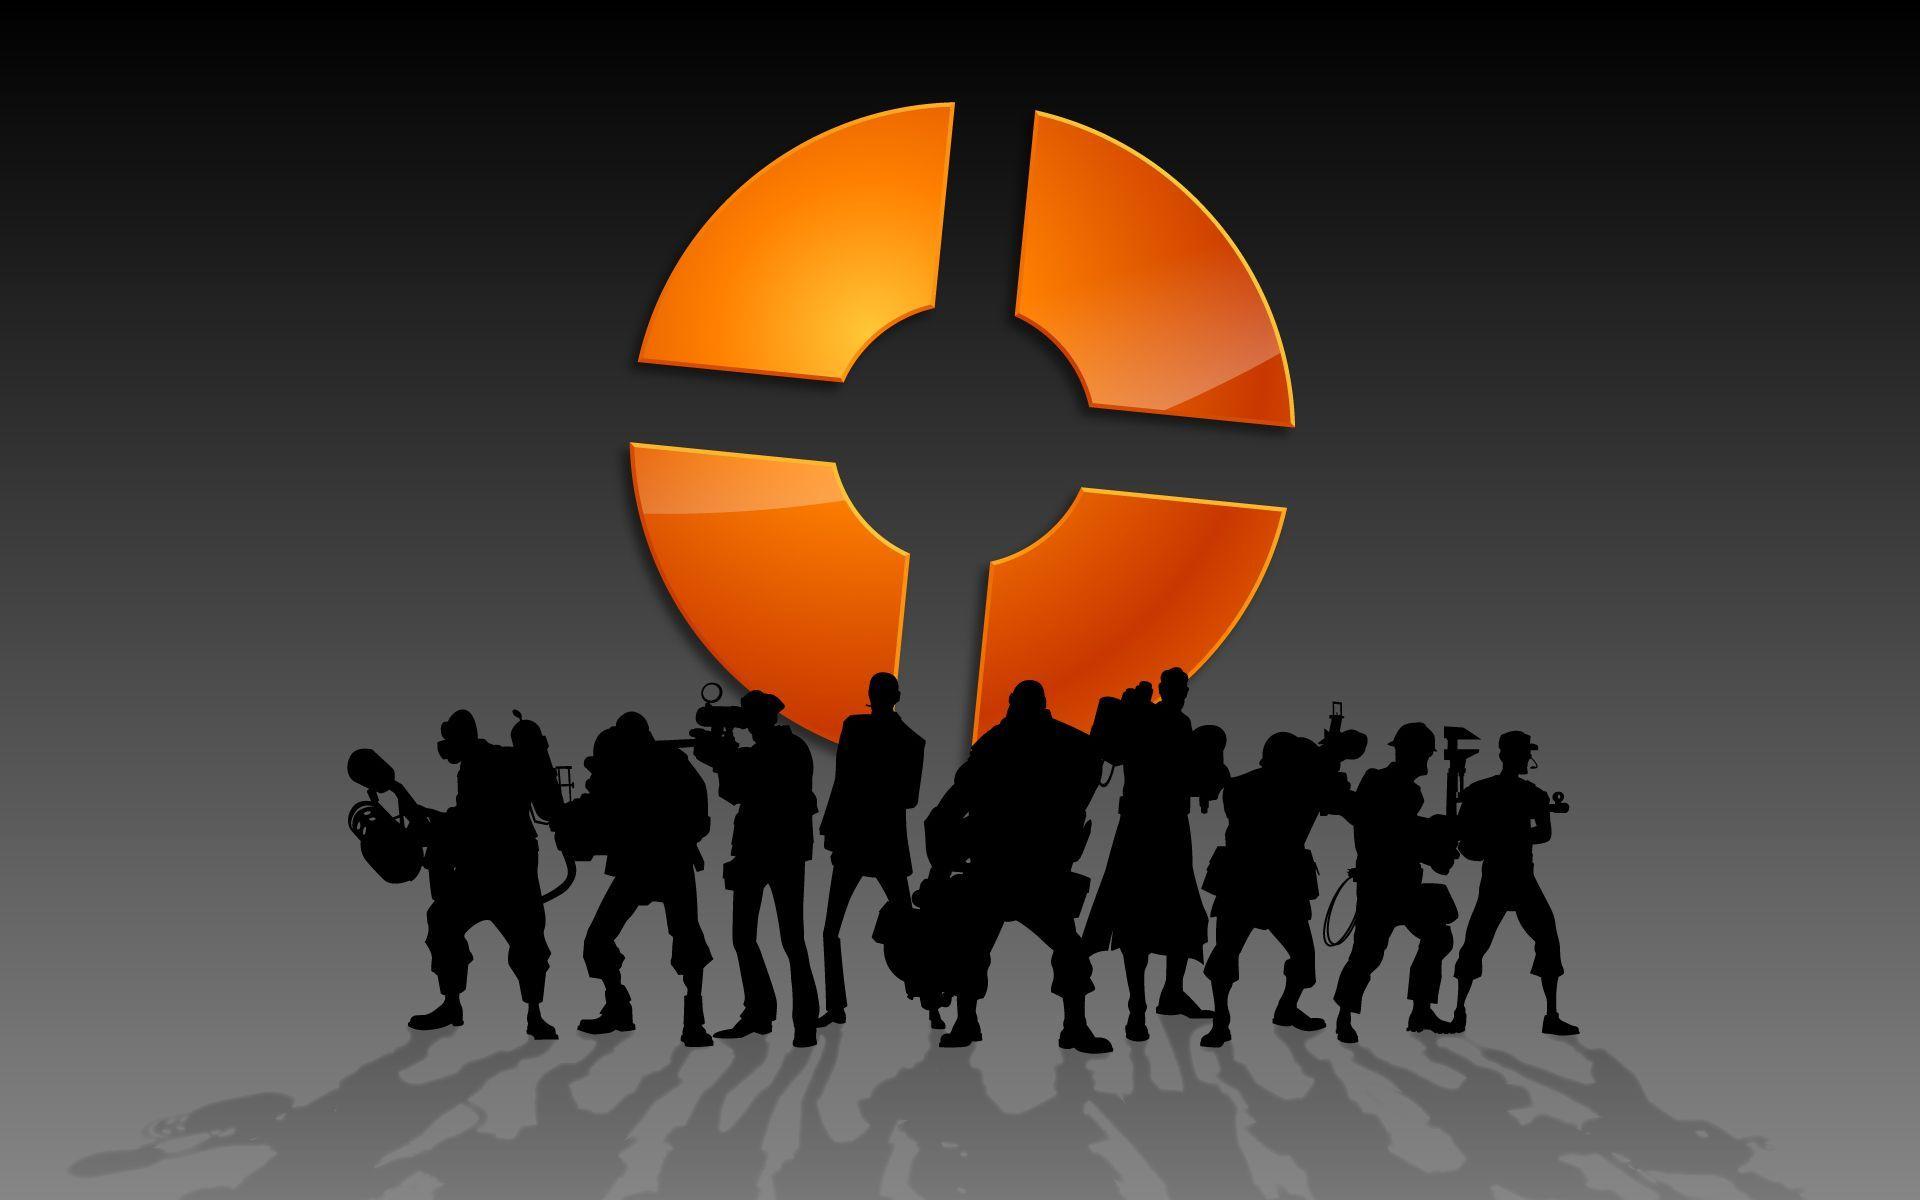 Team Fortress 2 download. PCGamesArchive